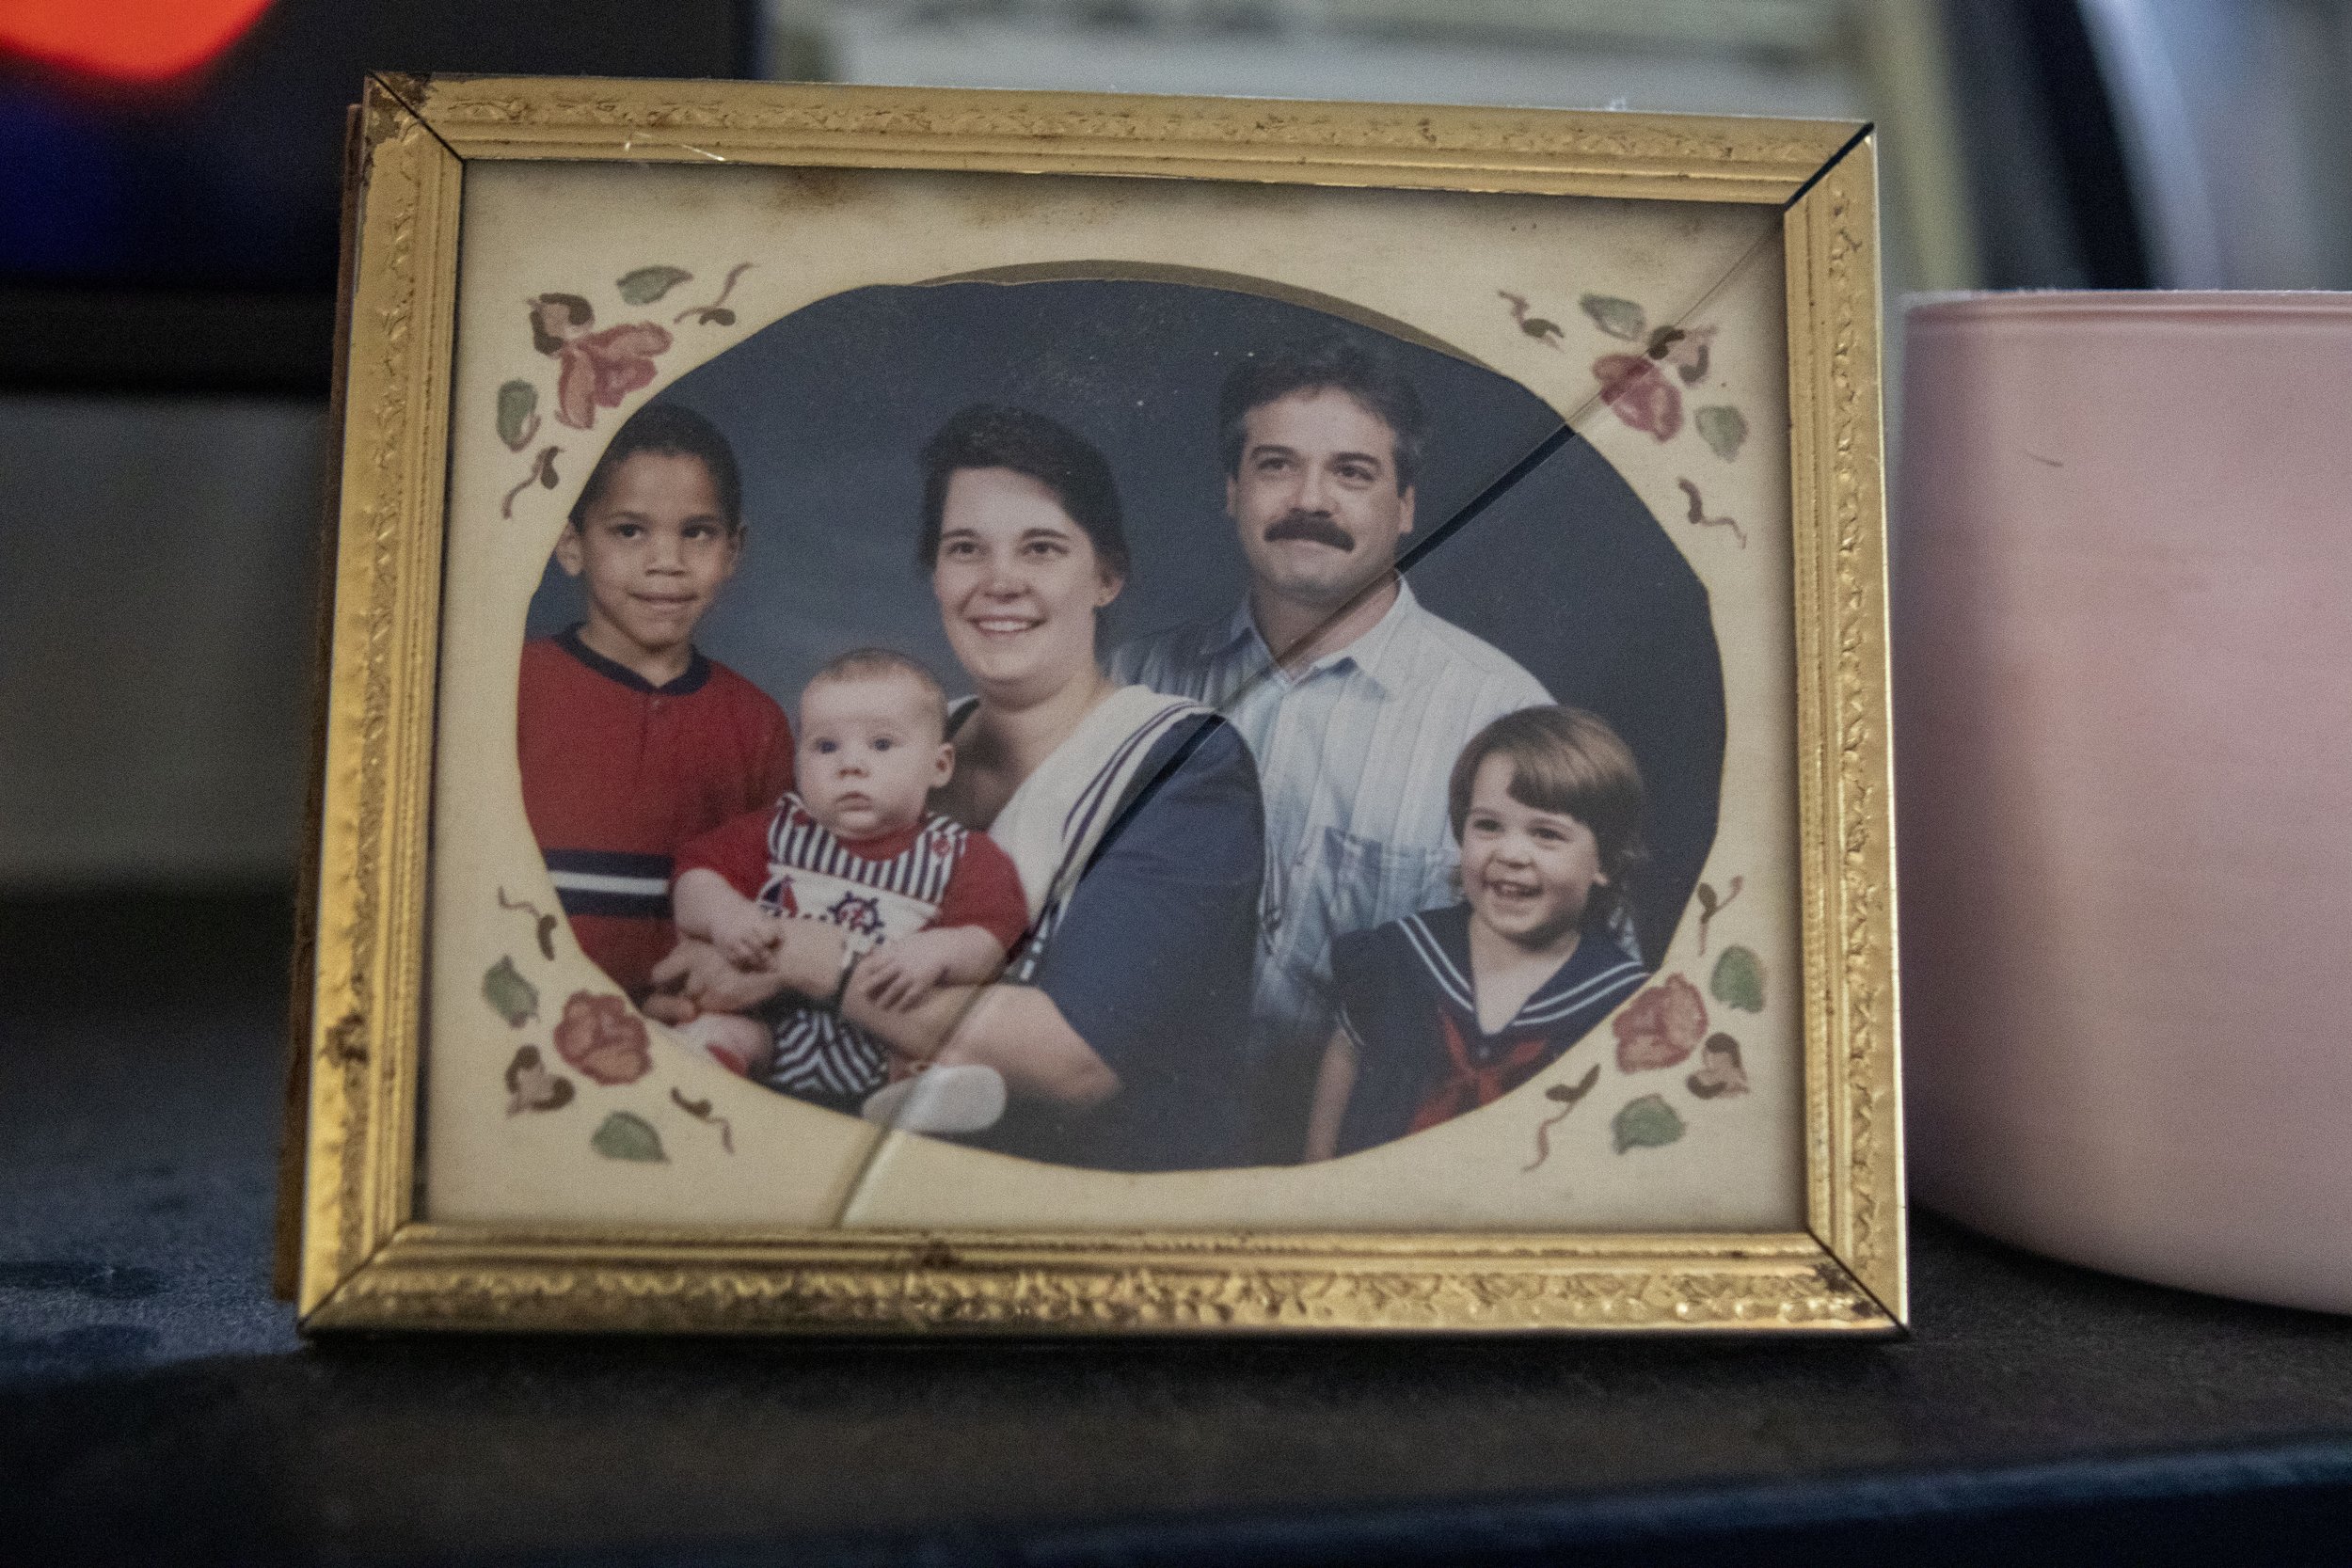  Left to right, a family portrait of Joshua Moss, Joseph Moss, Kay Moss, David Moss, and Breanna Moss, sits cracked on a mantel in the Moss family home. The house features many photos of the family, but are centered around Kay. 